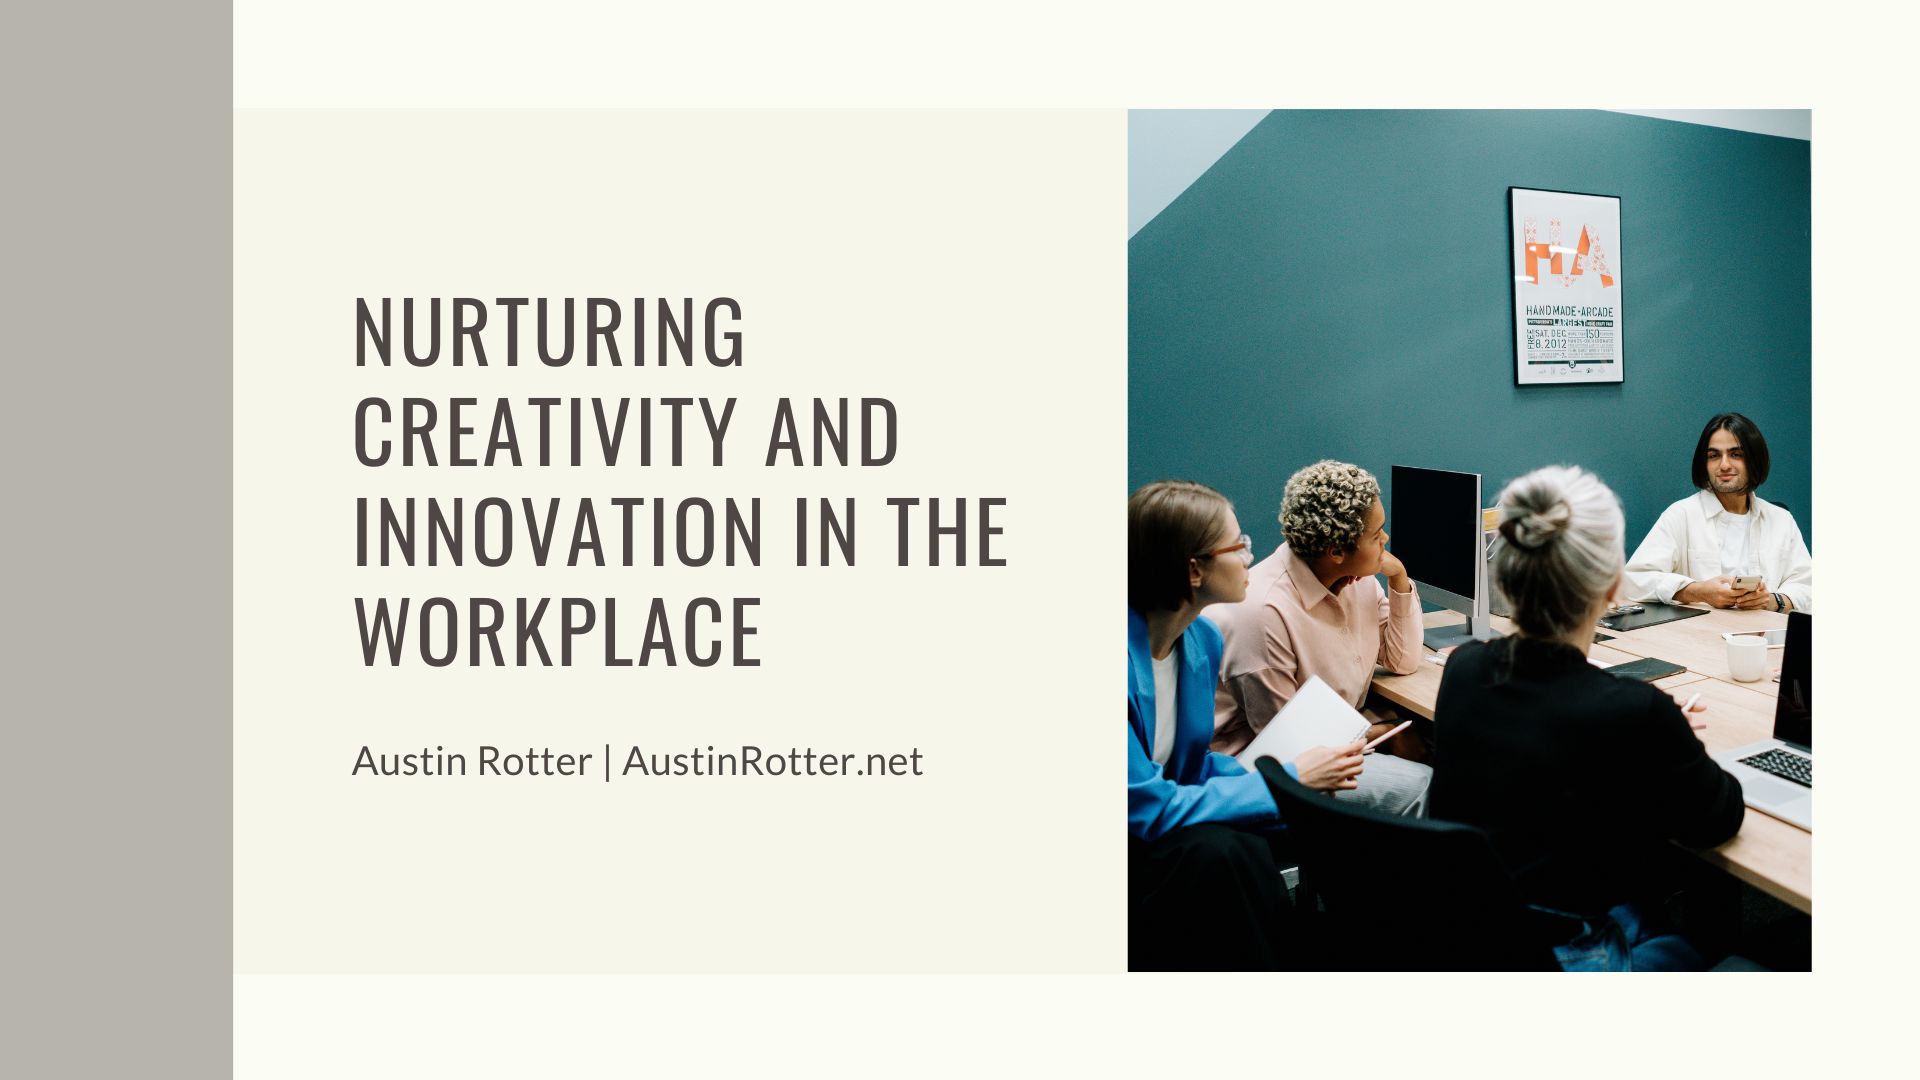 NURTURING
CREATIVITY AND
INNOVATION IN THE
WORKPLACE

Austin Rotter | AustinRotter.net